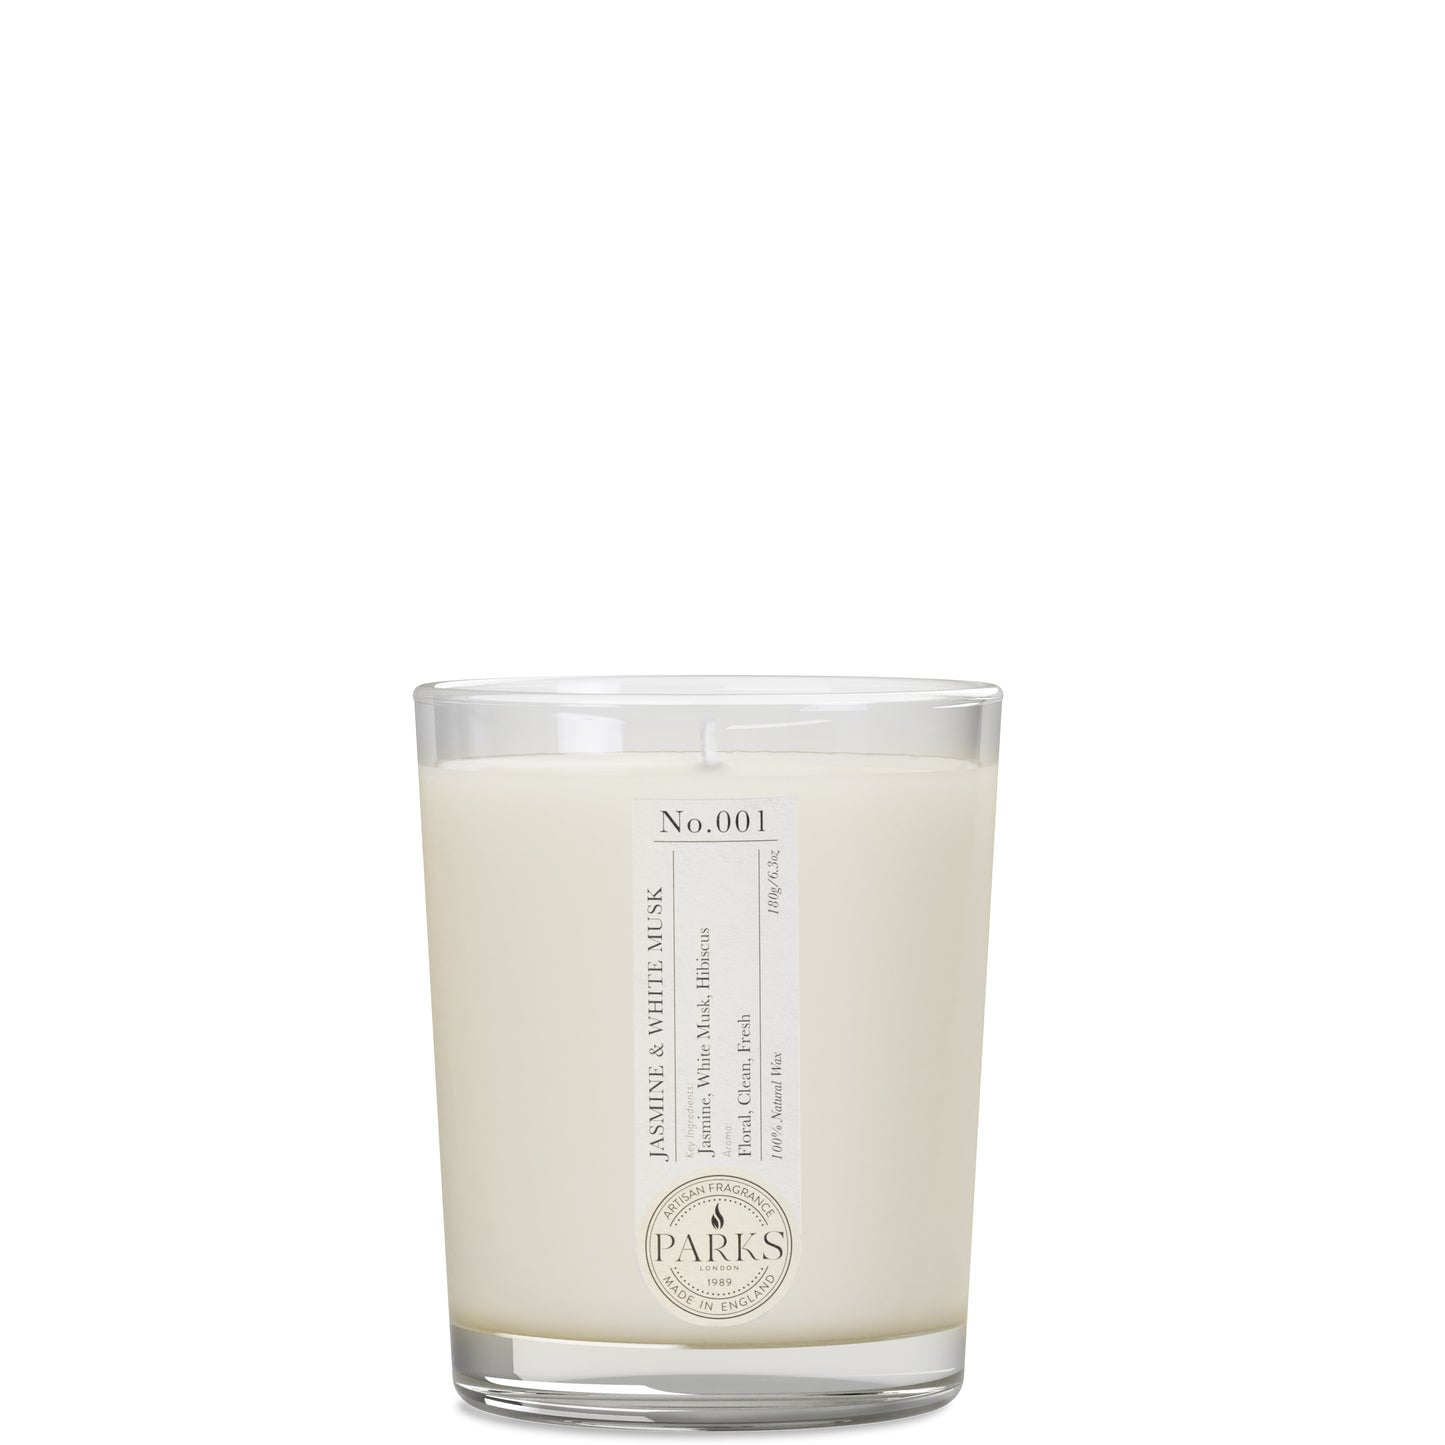 Parks London Home Collection Jasmine and White Musk Candle 180g